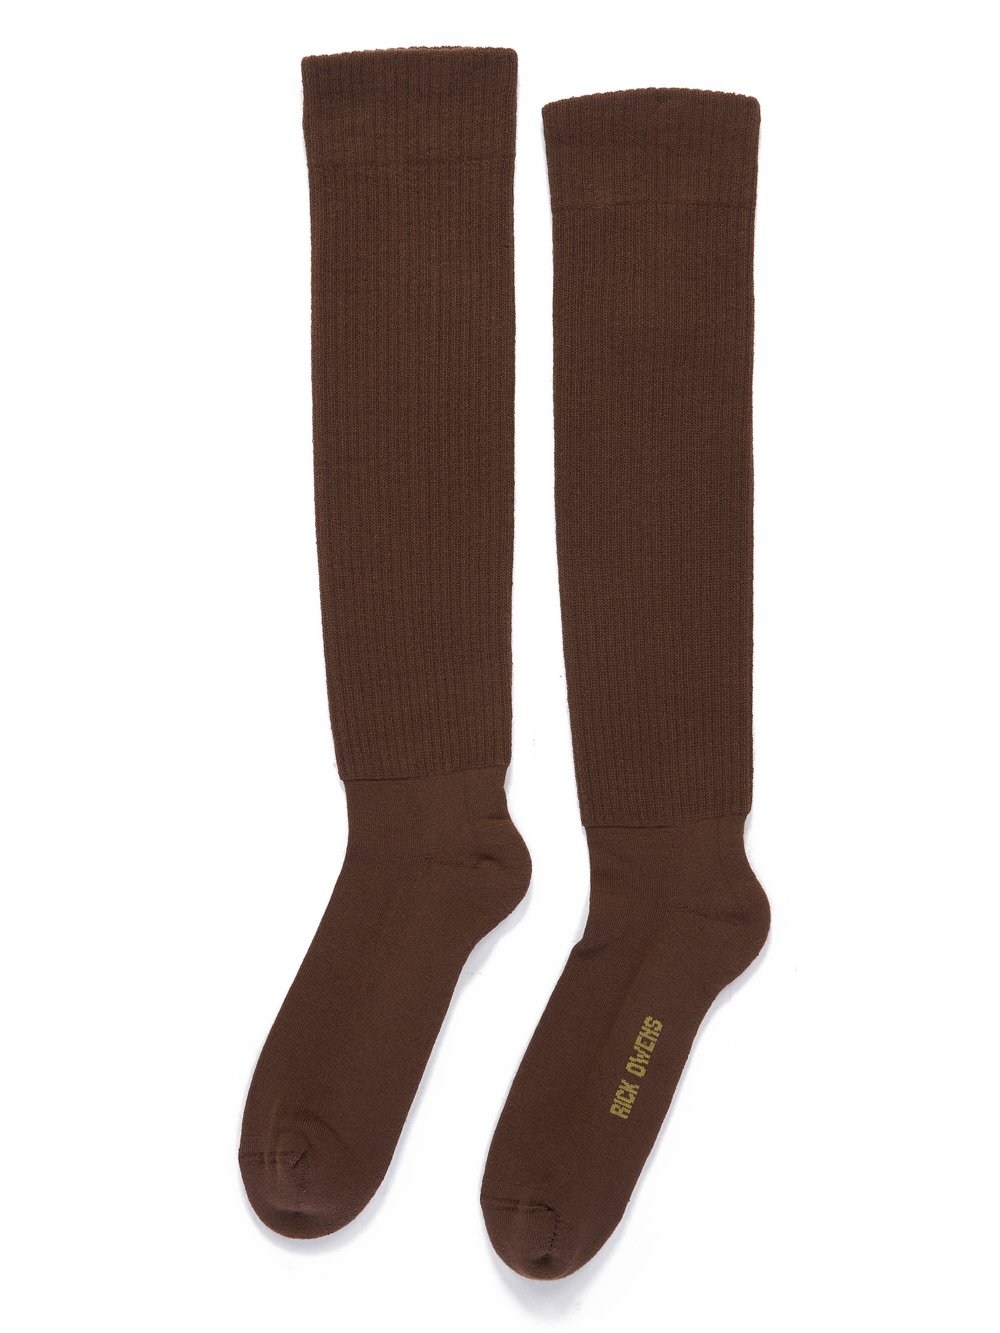 RICK OWENS FW23 LUXOR KNEE HIGH SOCKS IN BROWN AND ACID COTTON KNIT